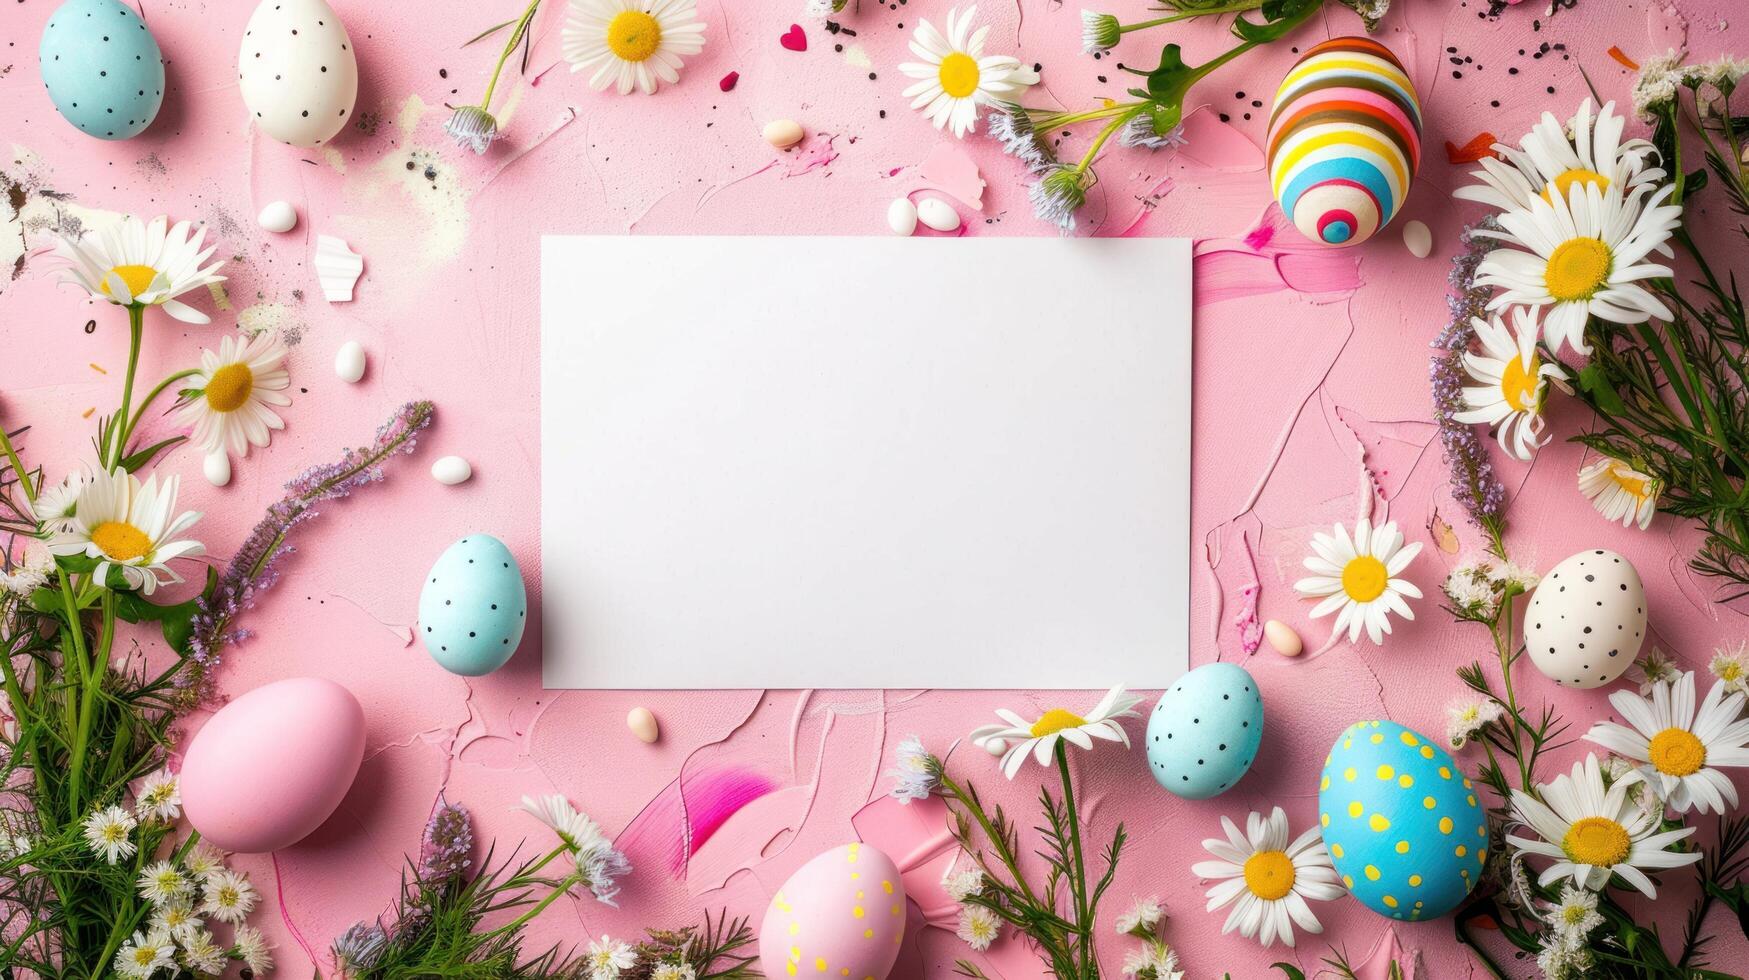 AI generated White paper on pink background with chamomile flowers, Easter eggs scattered. photo